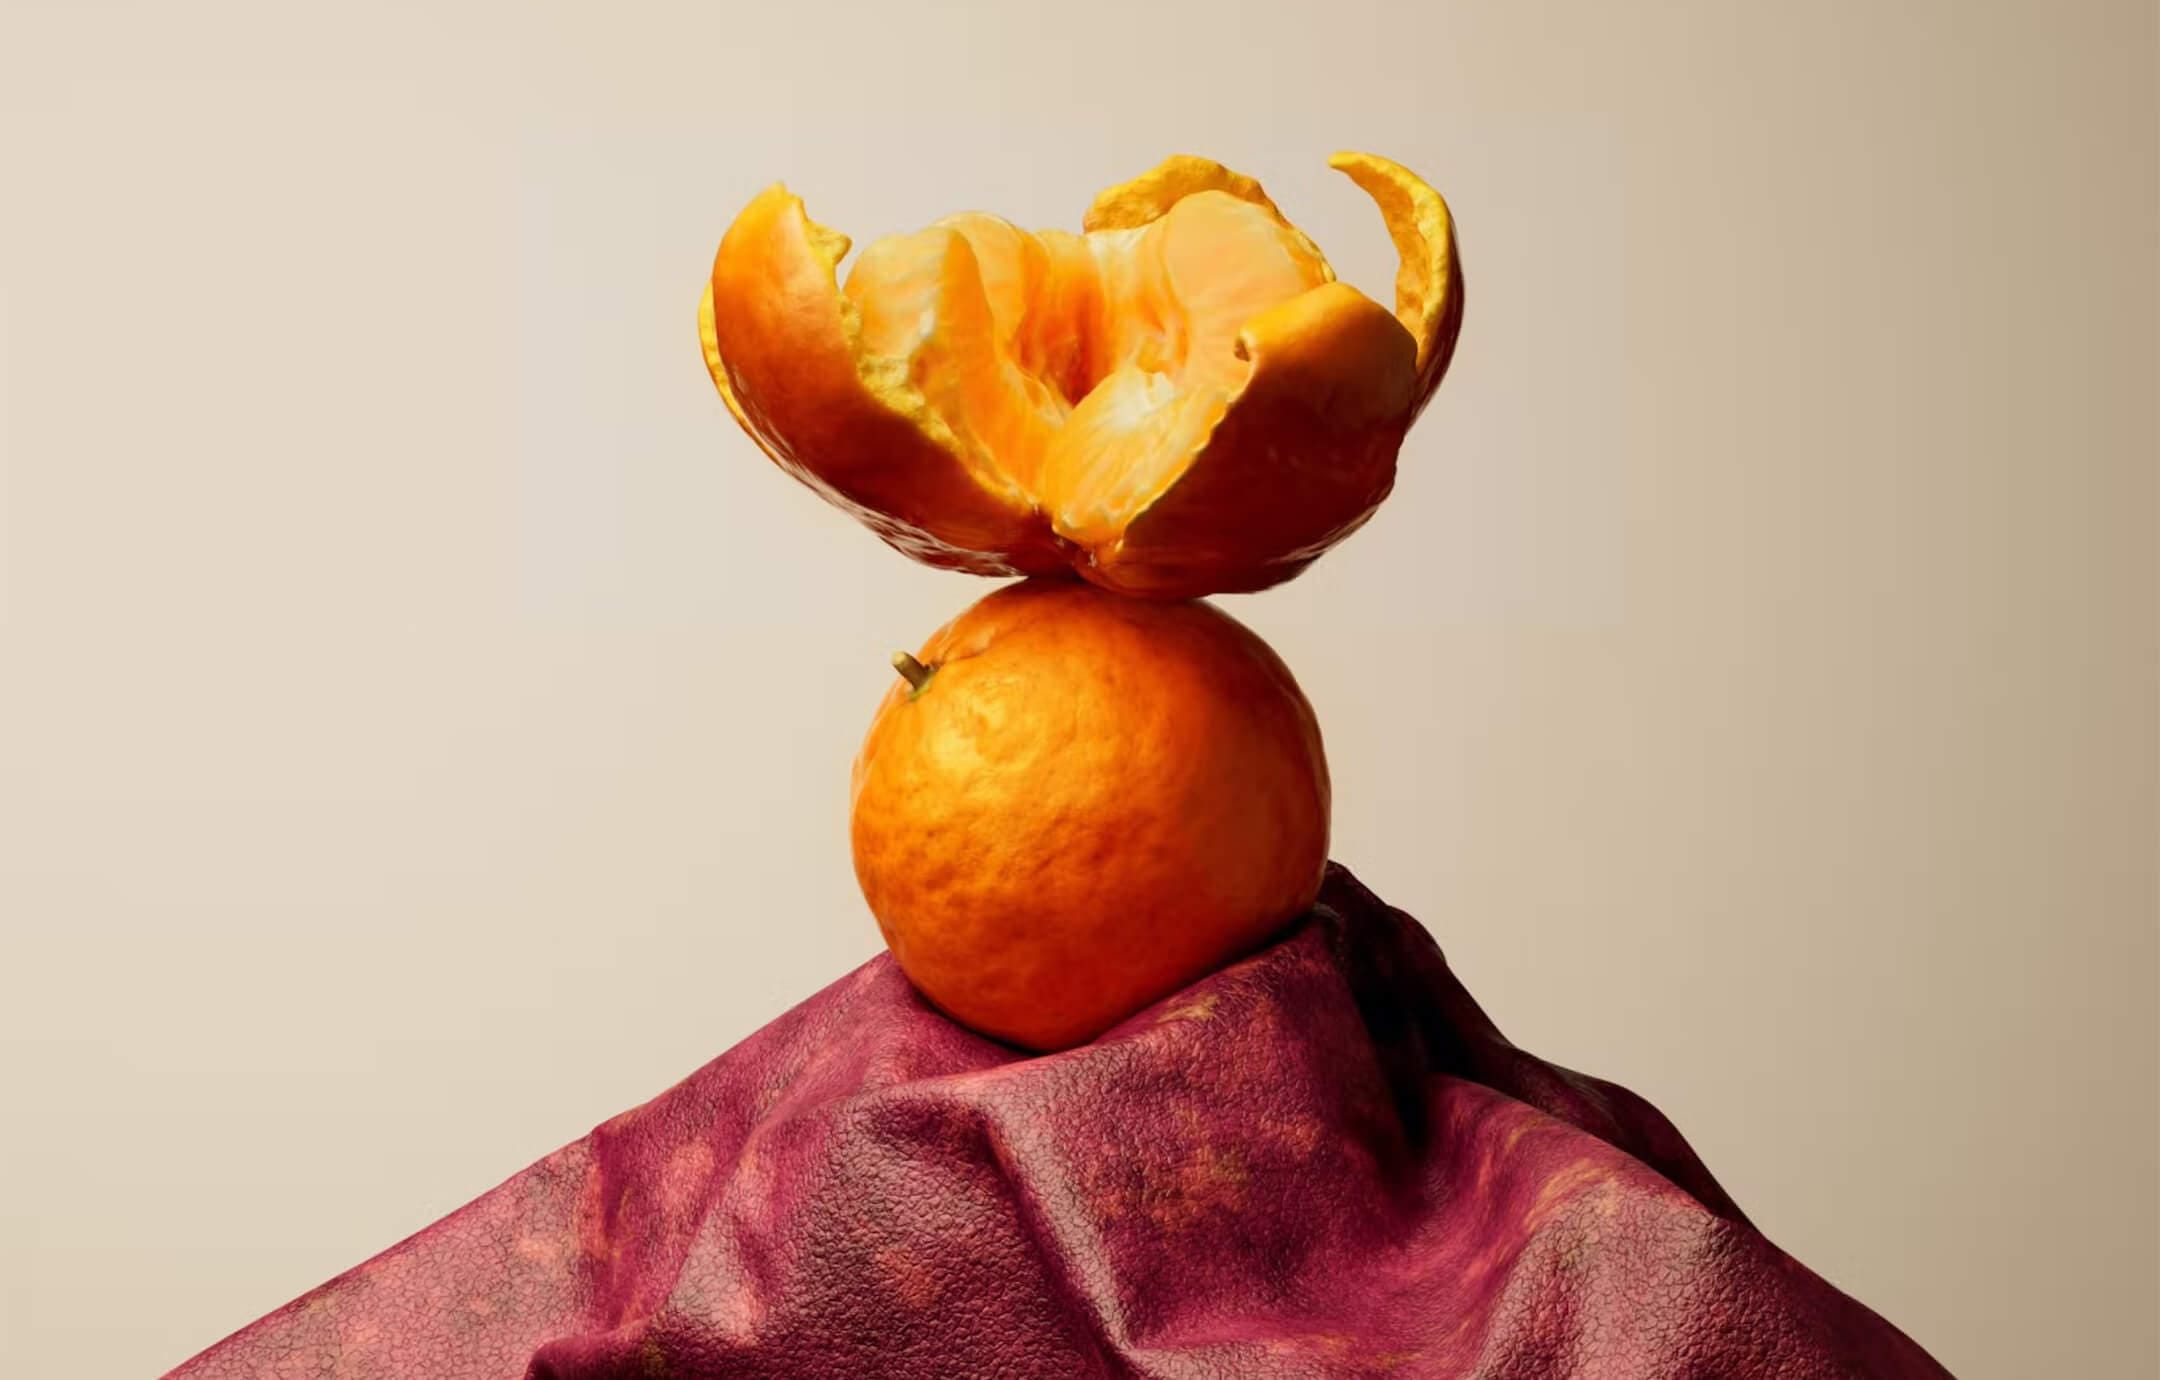 A still-life picture in which an orange rind balances on an orange which balances on a small mount of a dark-red mottled material that looks like leather